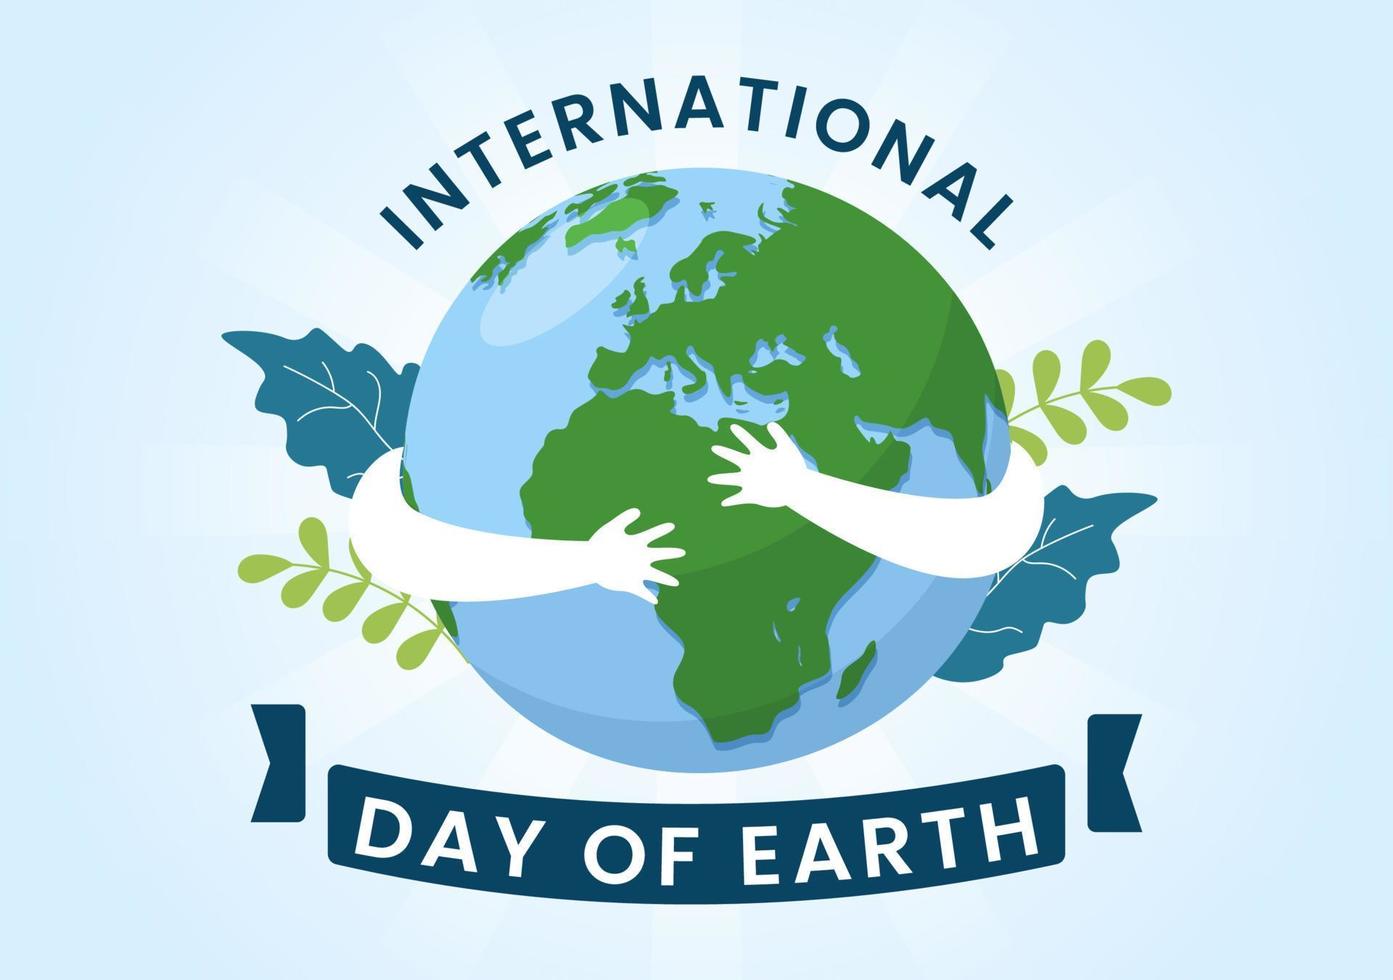 Happy Earth Day on April 22 Illustration with World Map Environment in Flat Cartoon Hand Drawn for Web Banner or Landing Page Templates vector